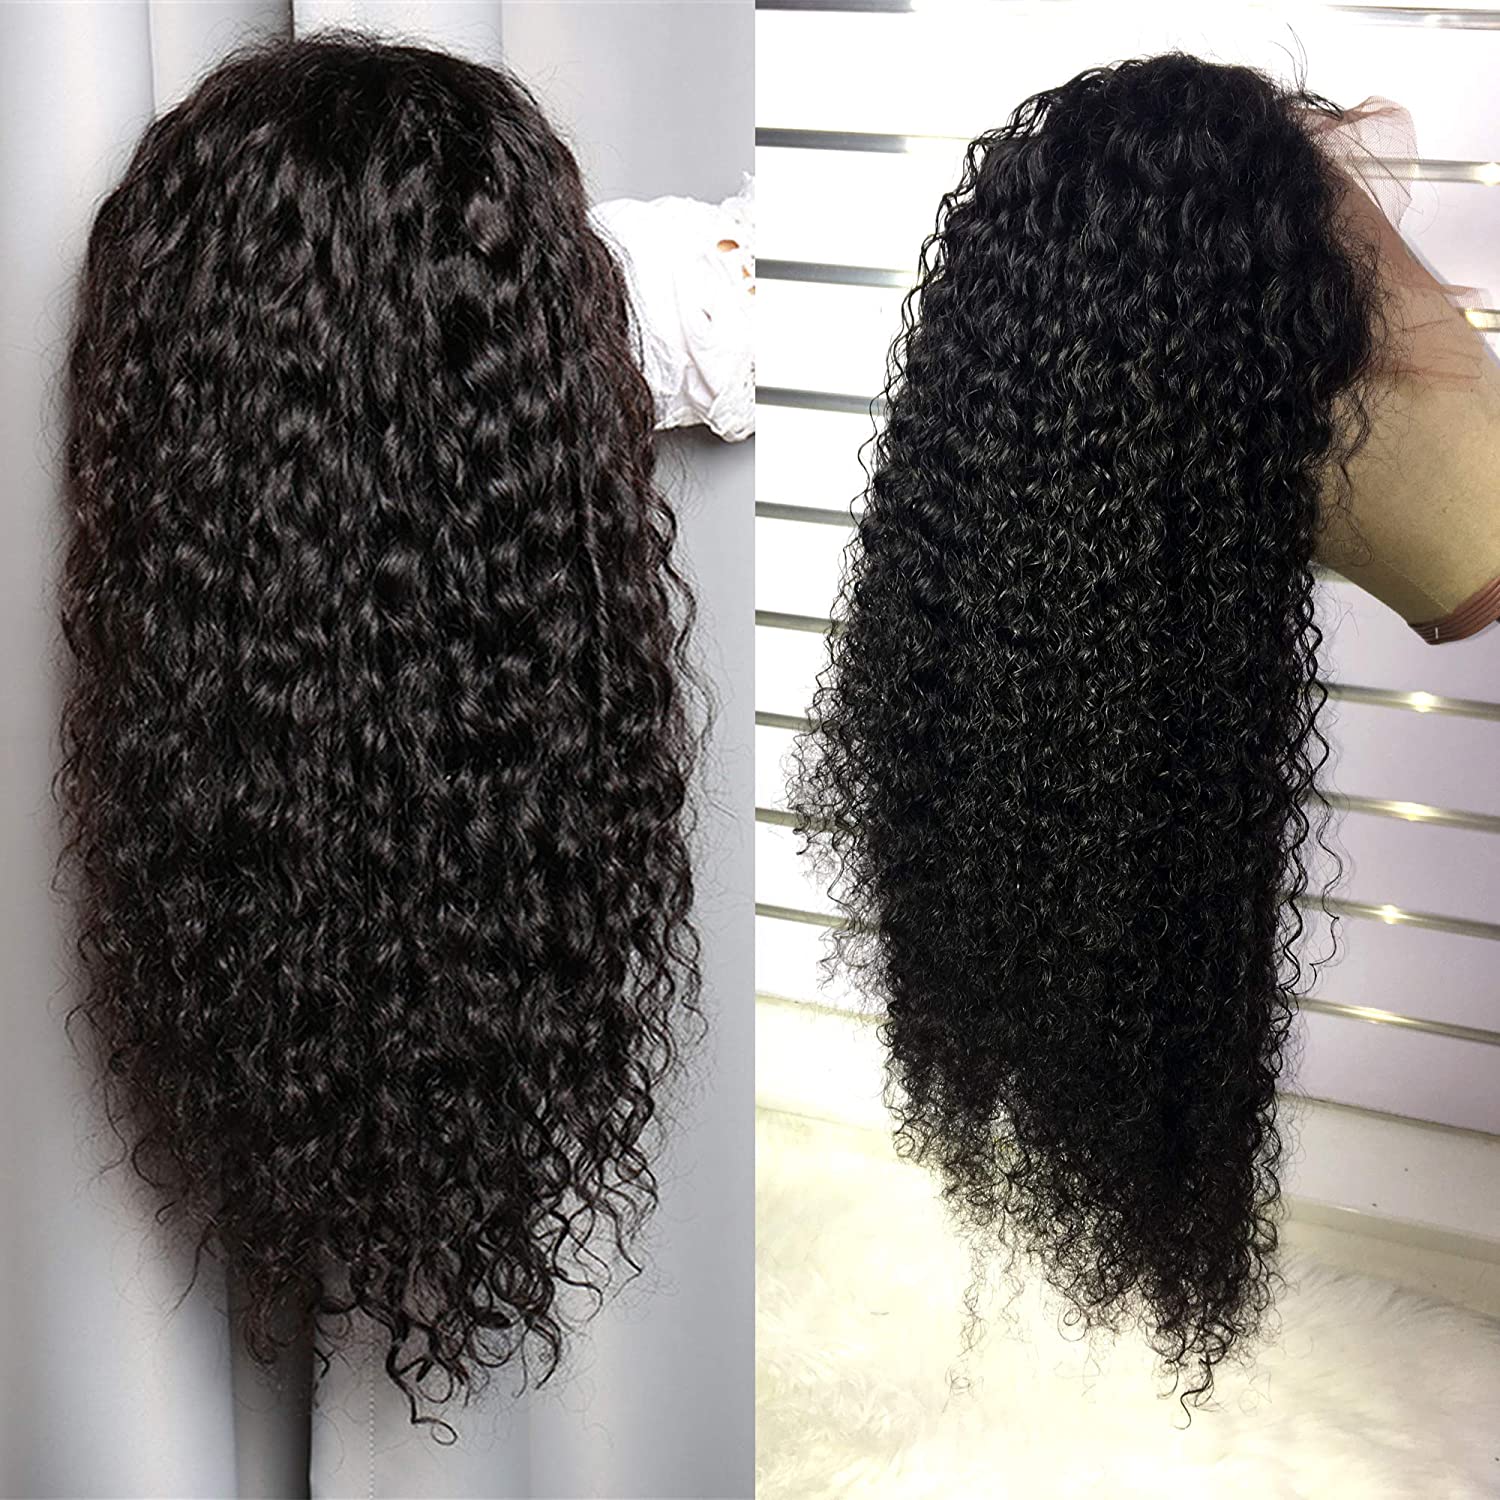 Gluna 13x4 Lace Frontal Wigs Water Wave Human Hair Healthy Virgin Hair Pre Plucked With Natural Baby Hair For Women